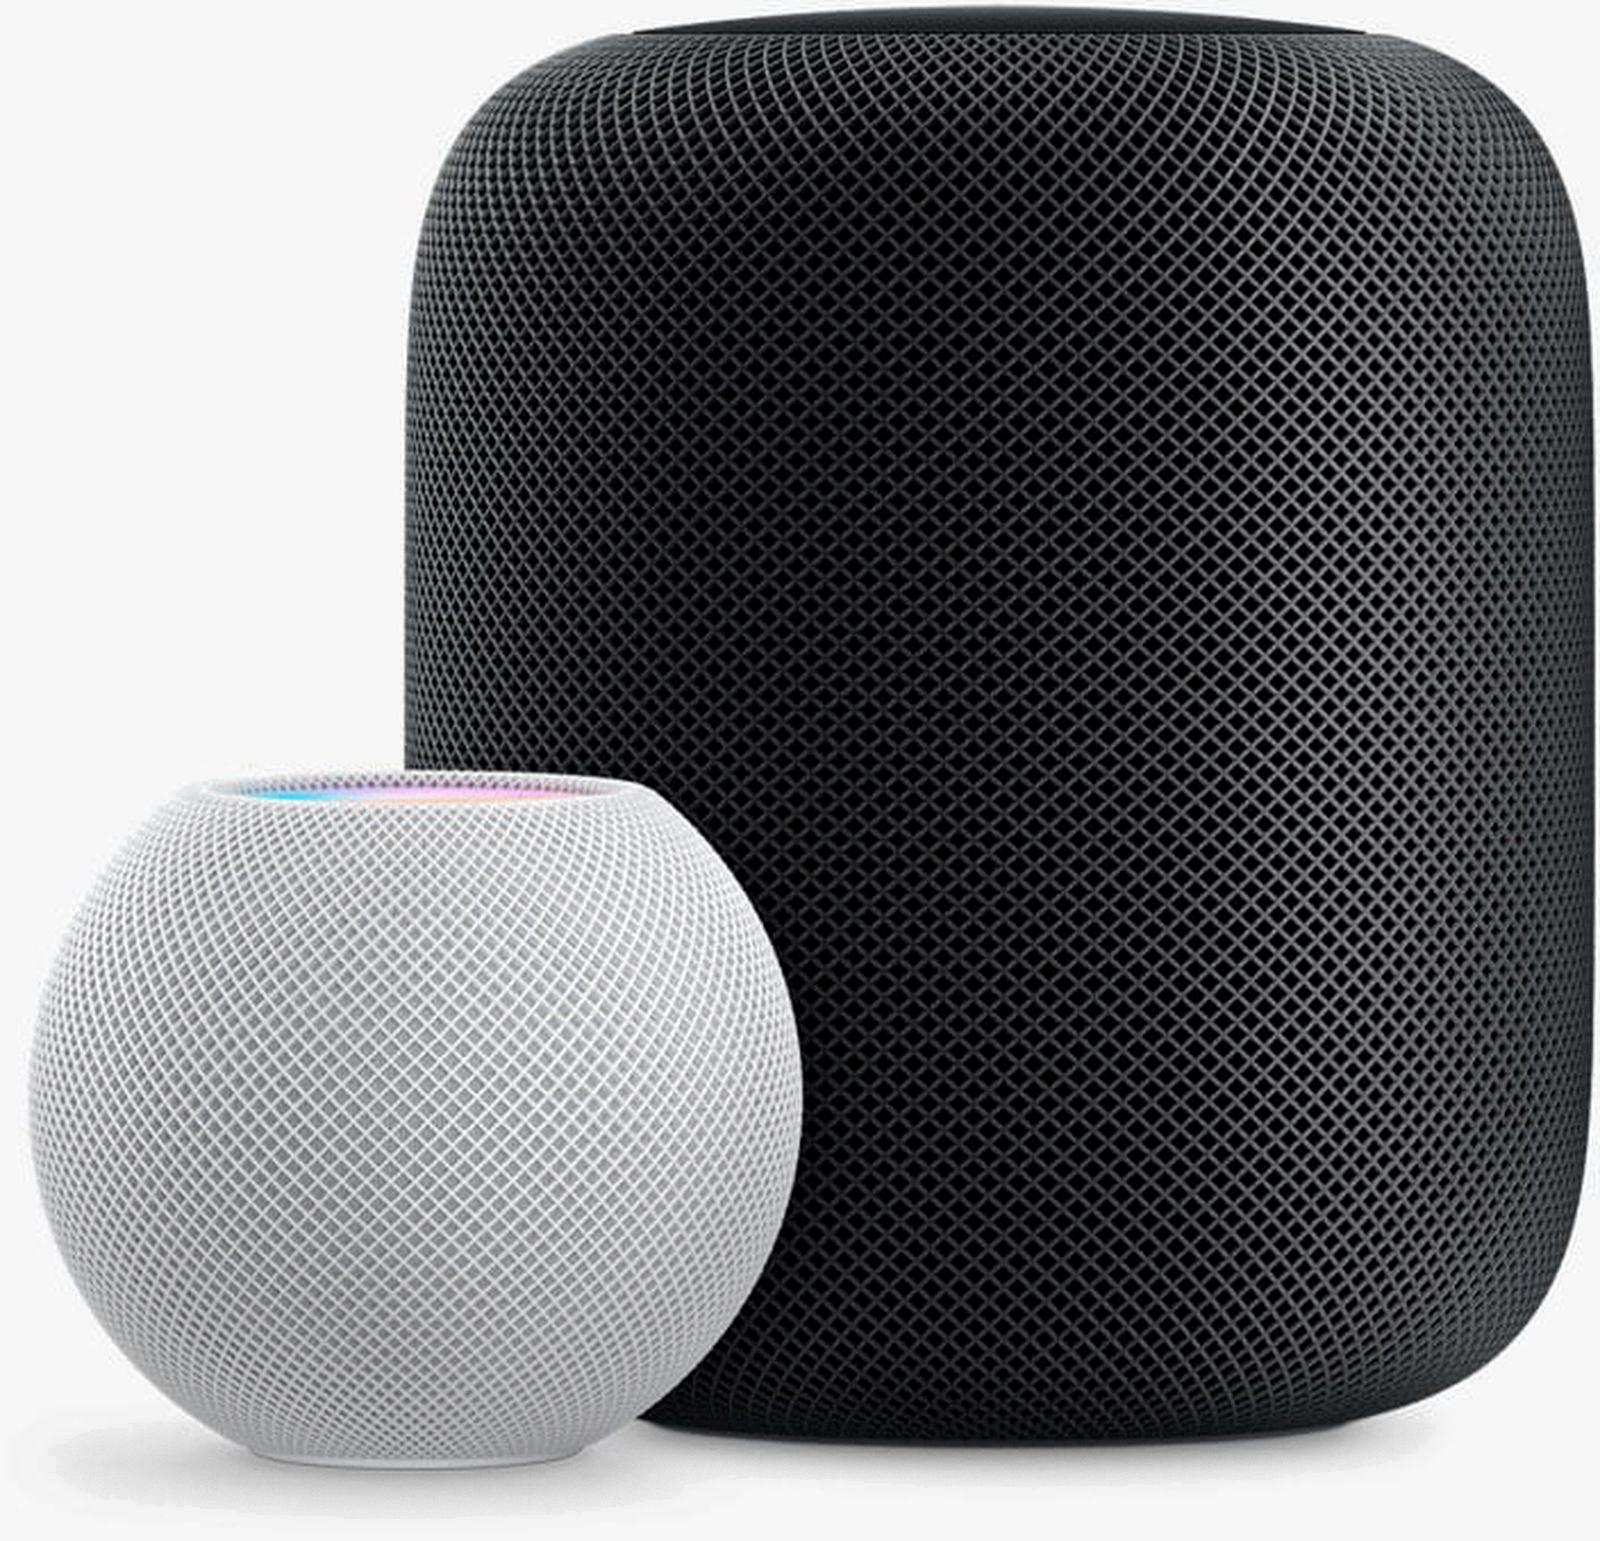 How Many Homepods Can You Pair 15